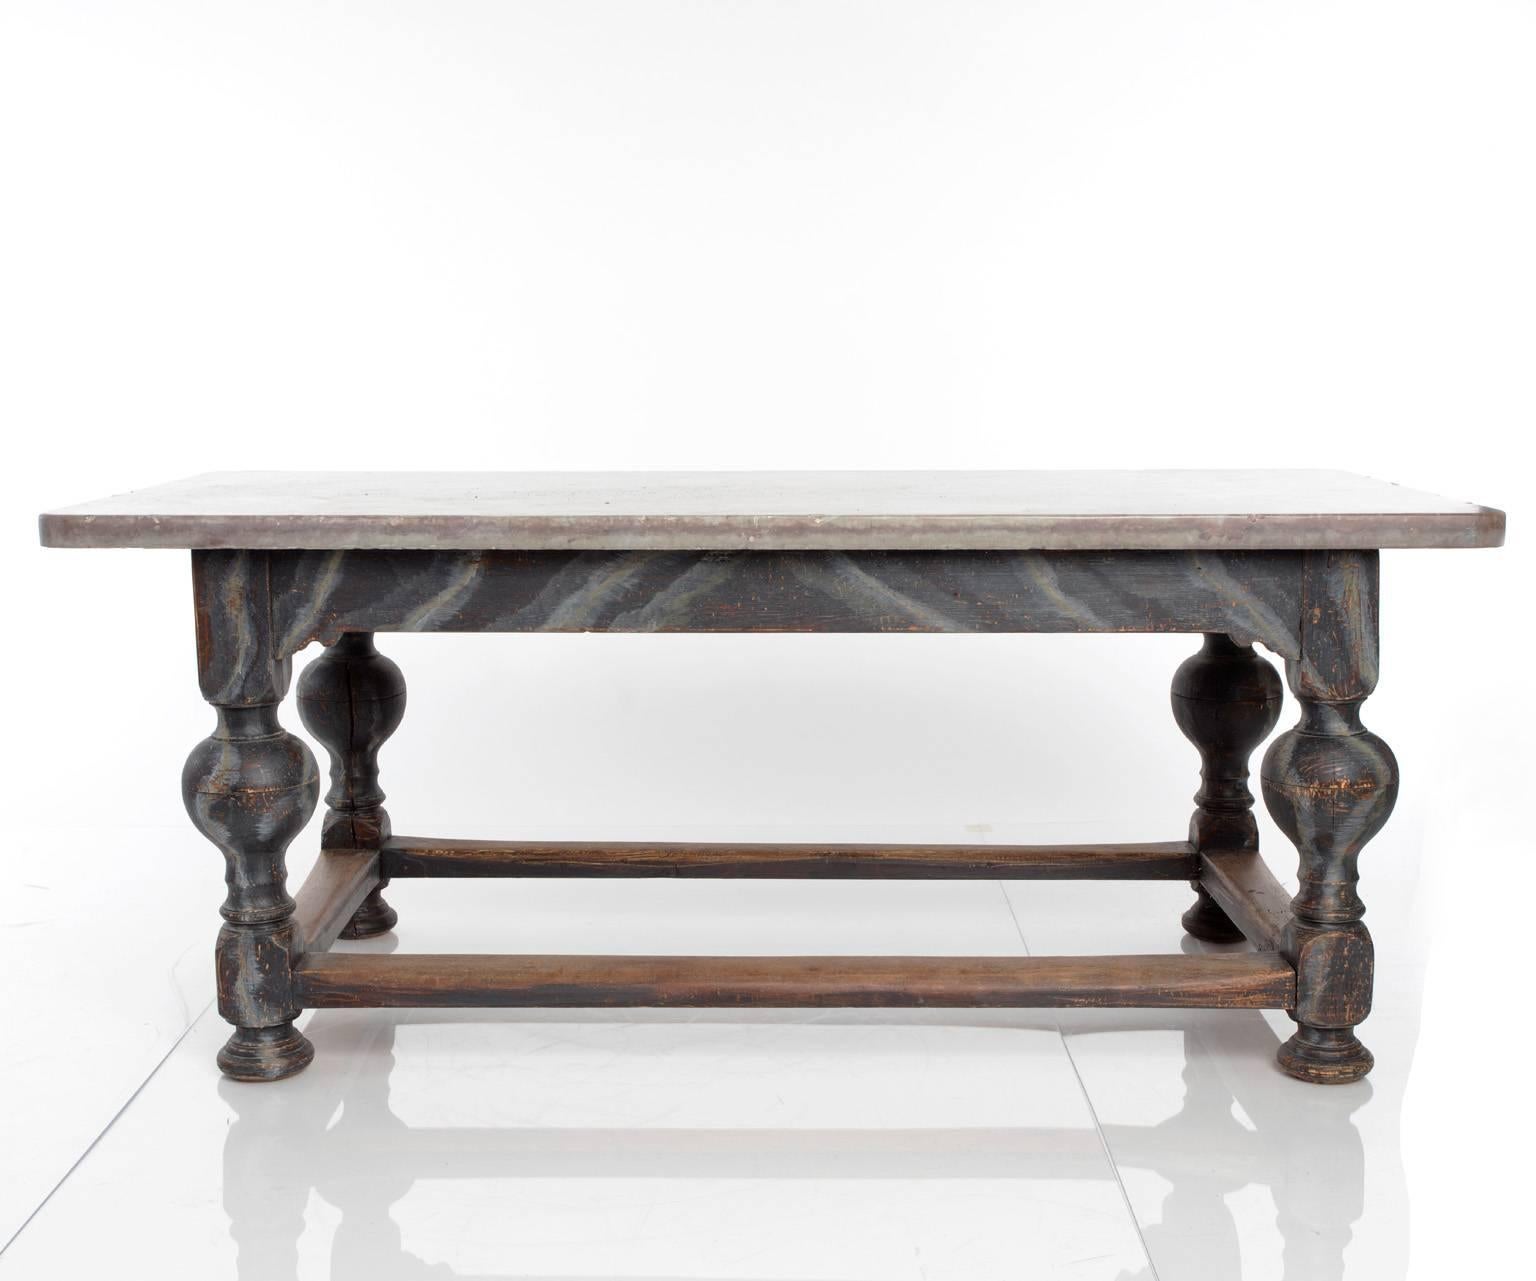 Swedish, late 18th early 19th century. A large oak table with painted grey marbling and oland stone top. Straight skirt, turned legs on ball foot, stretchers.
 